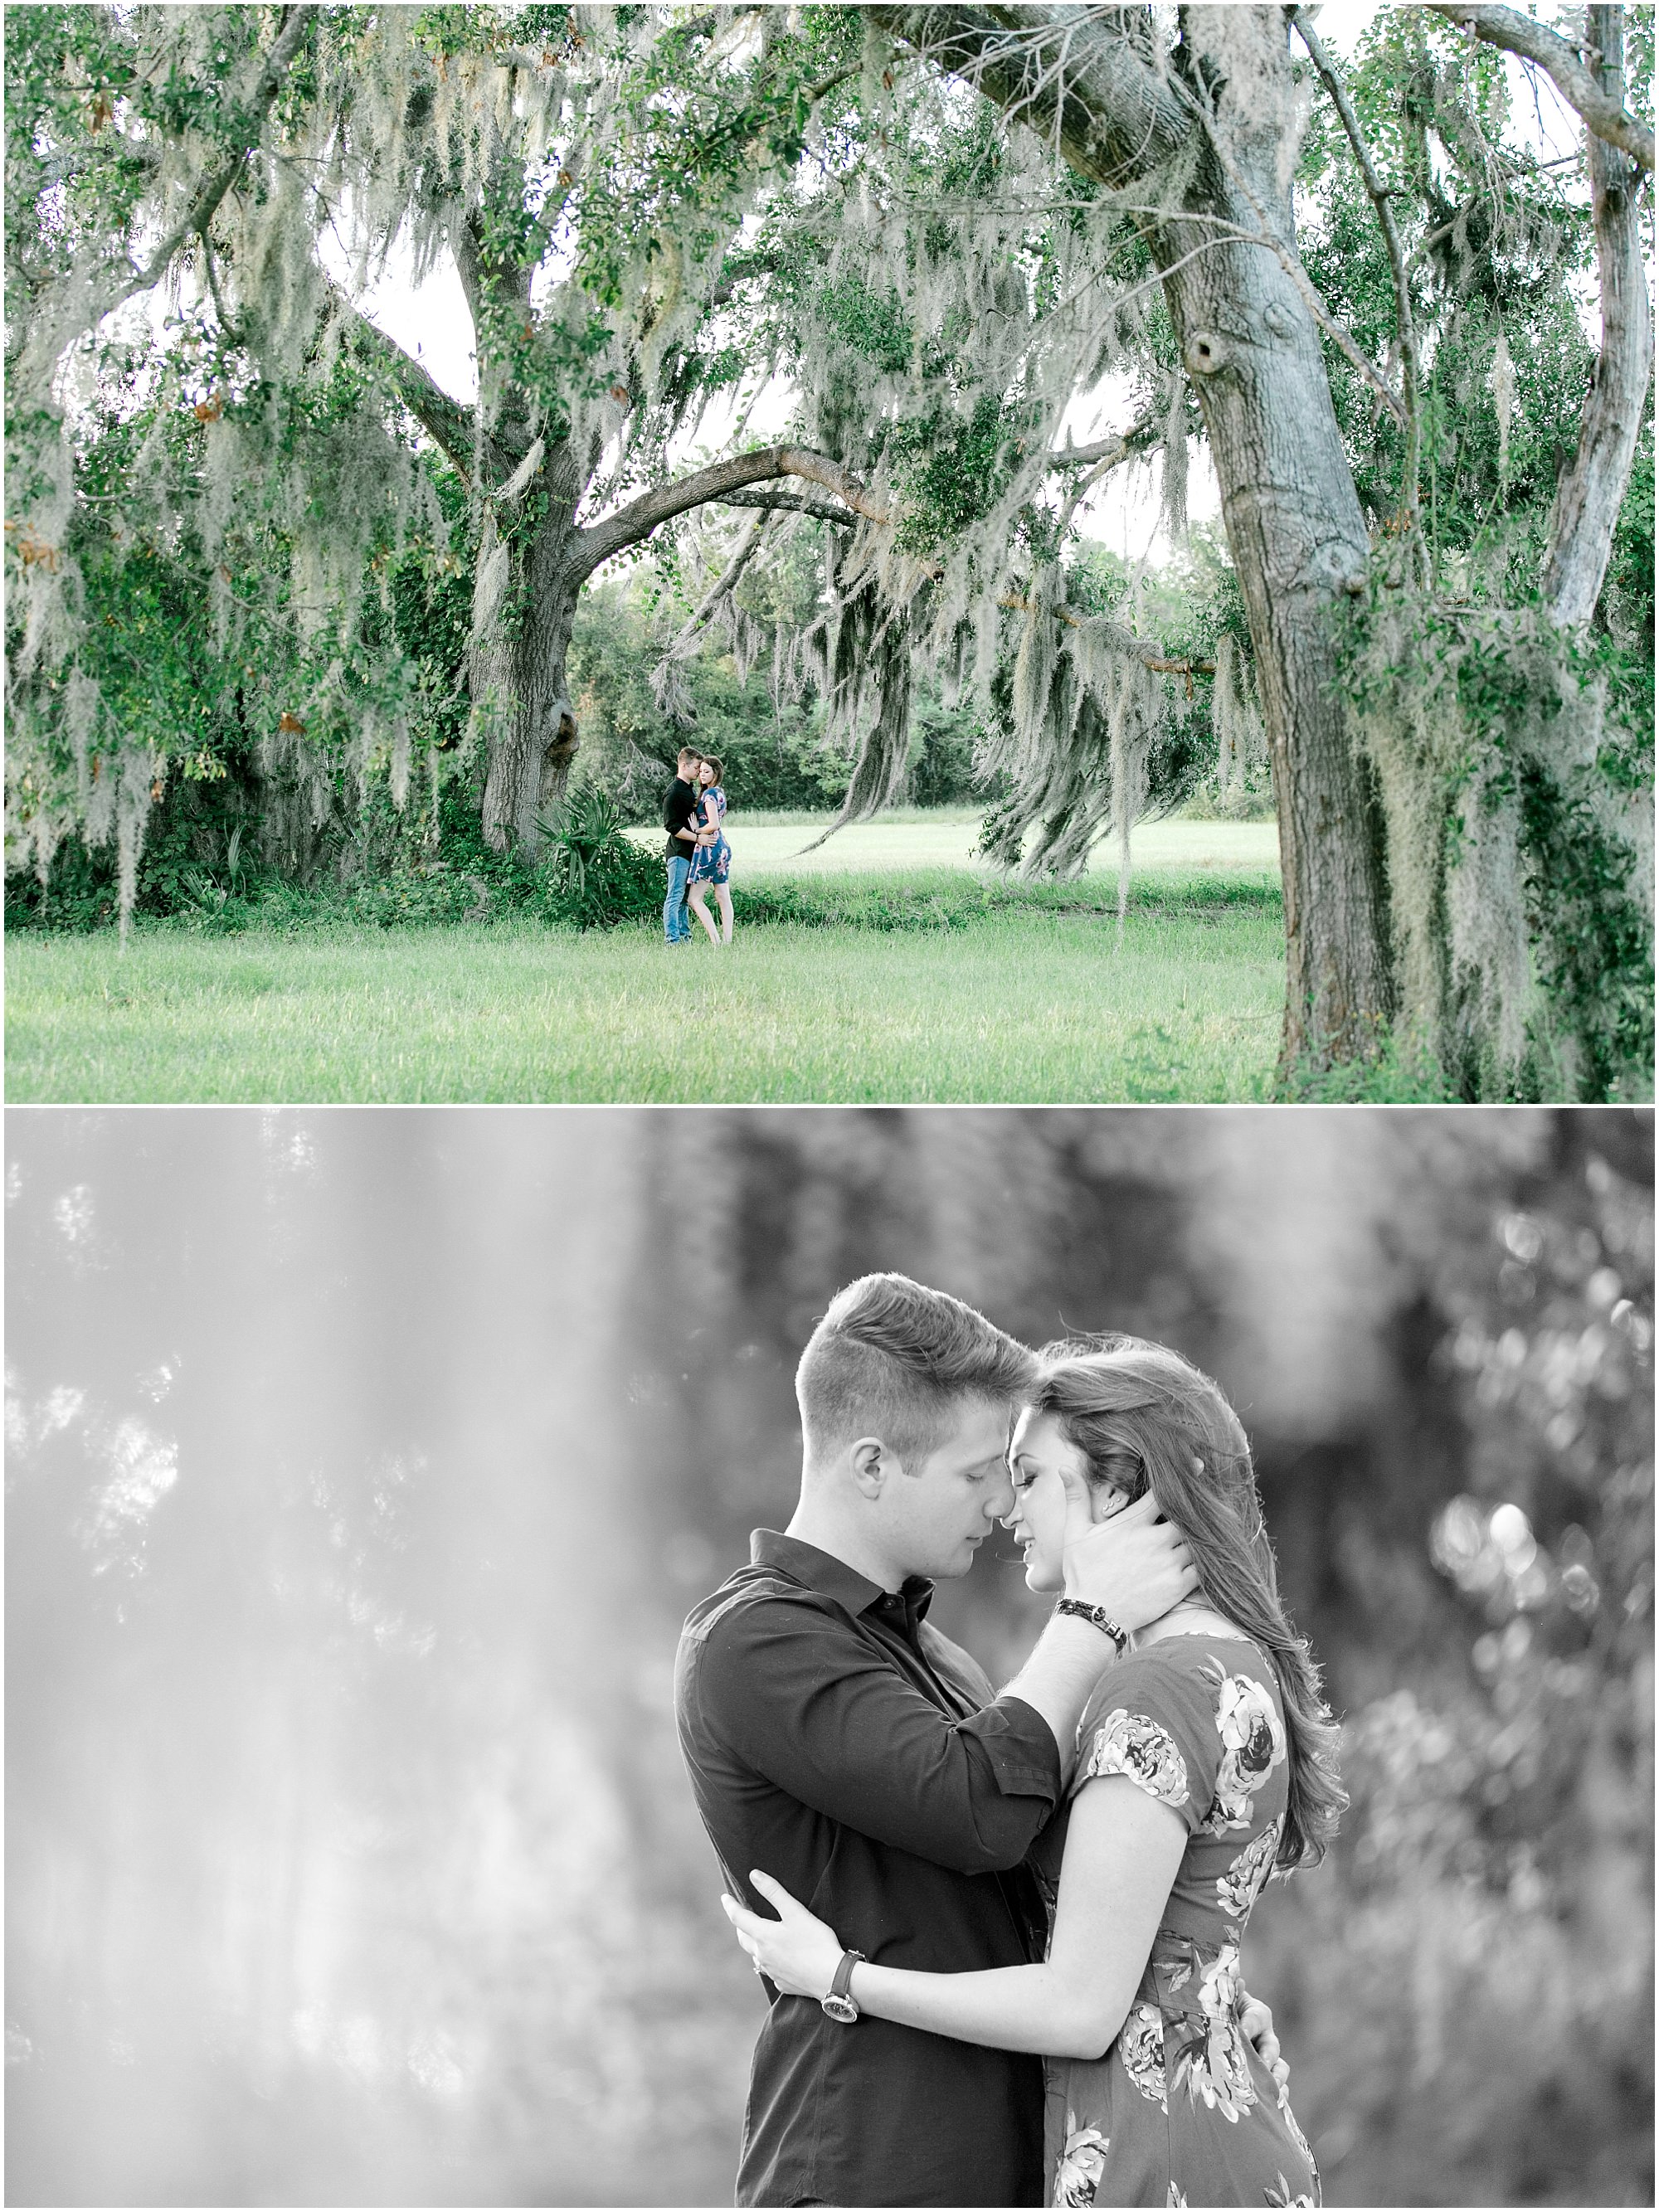 Couple standing under old oak trees with hanging moss during their engagement session. 